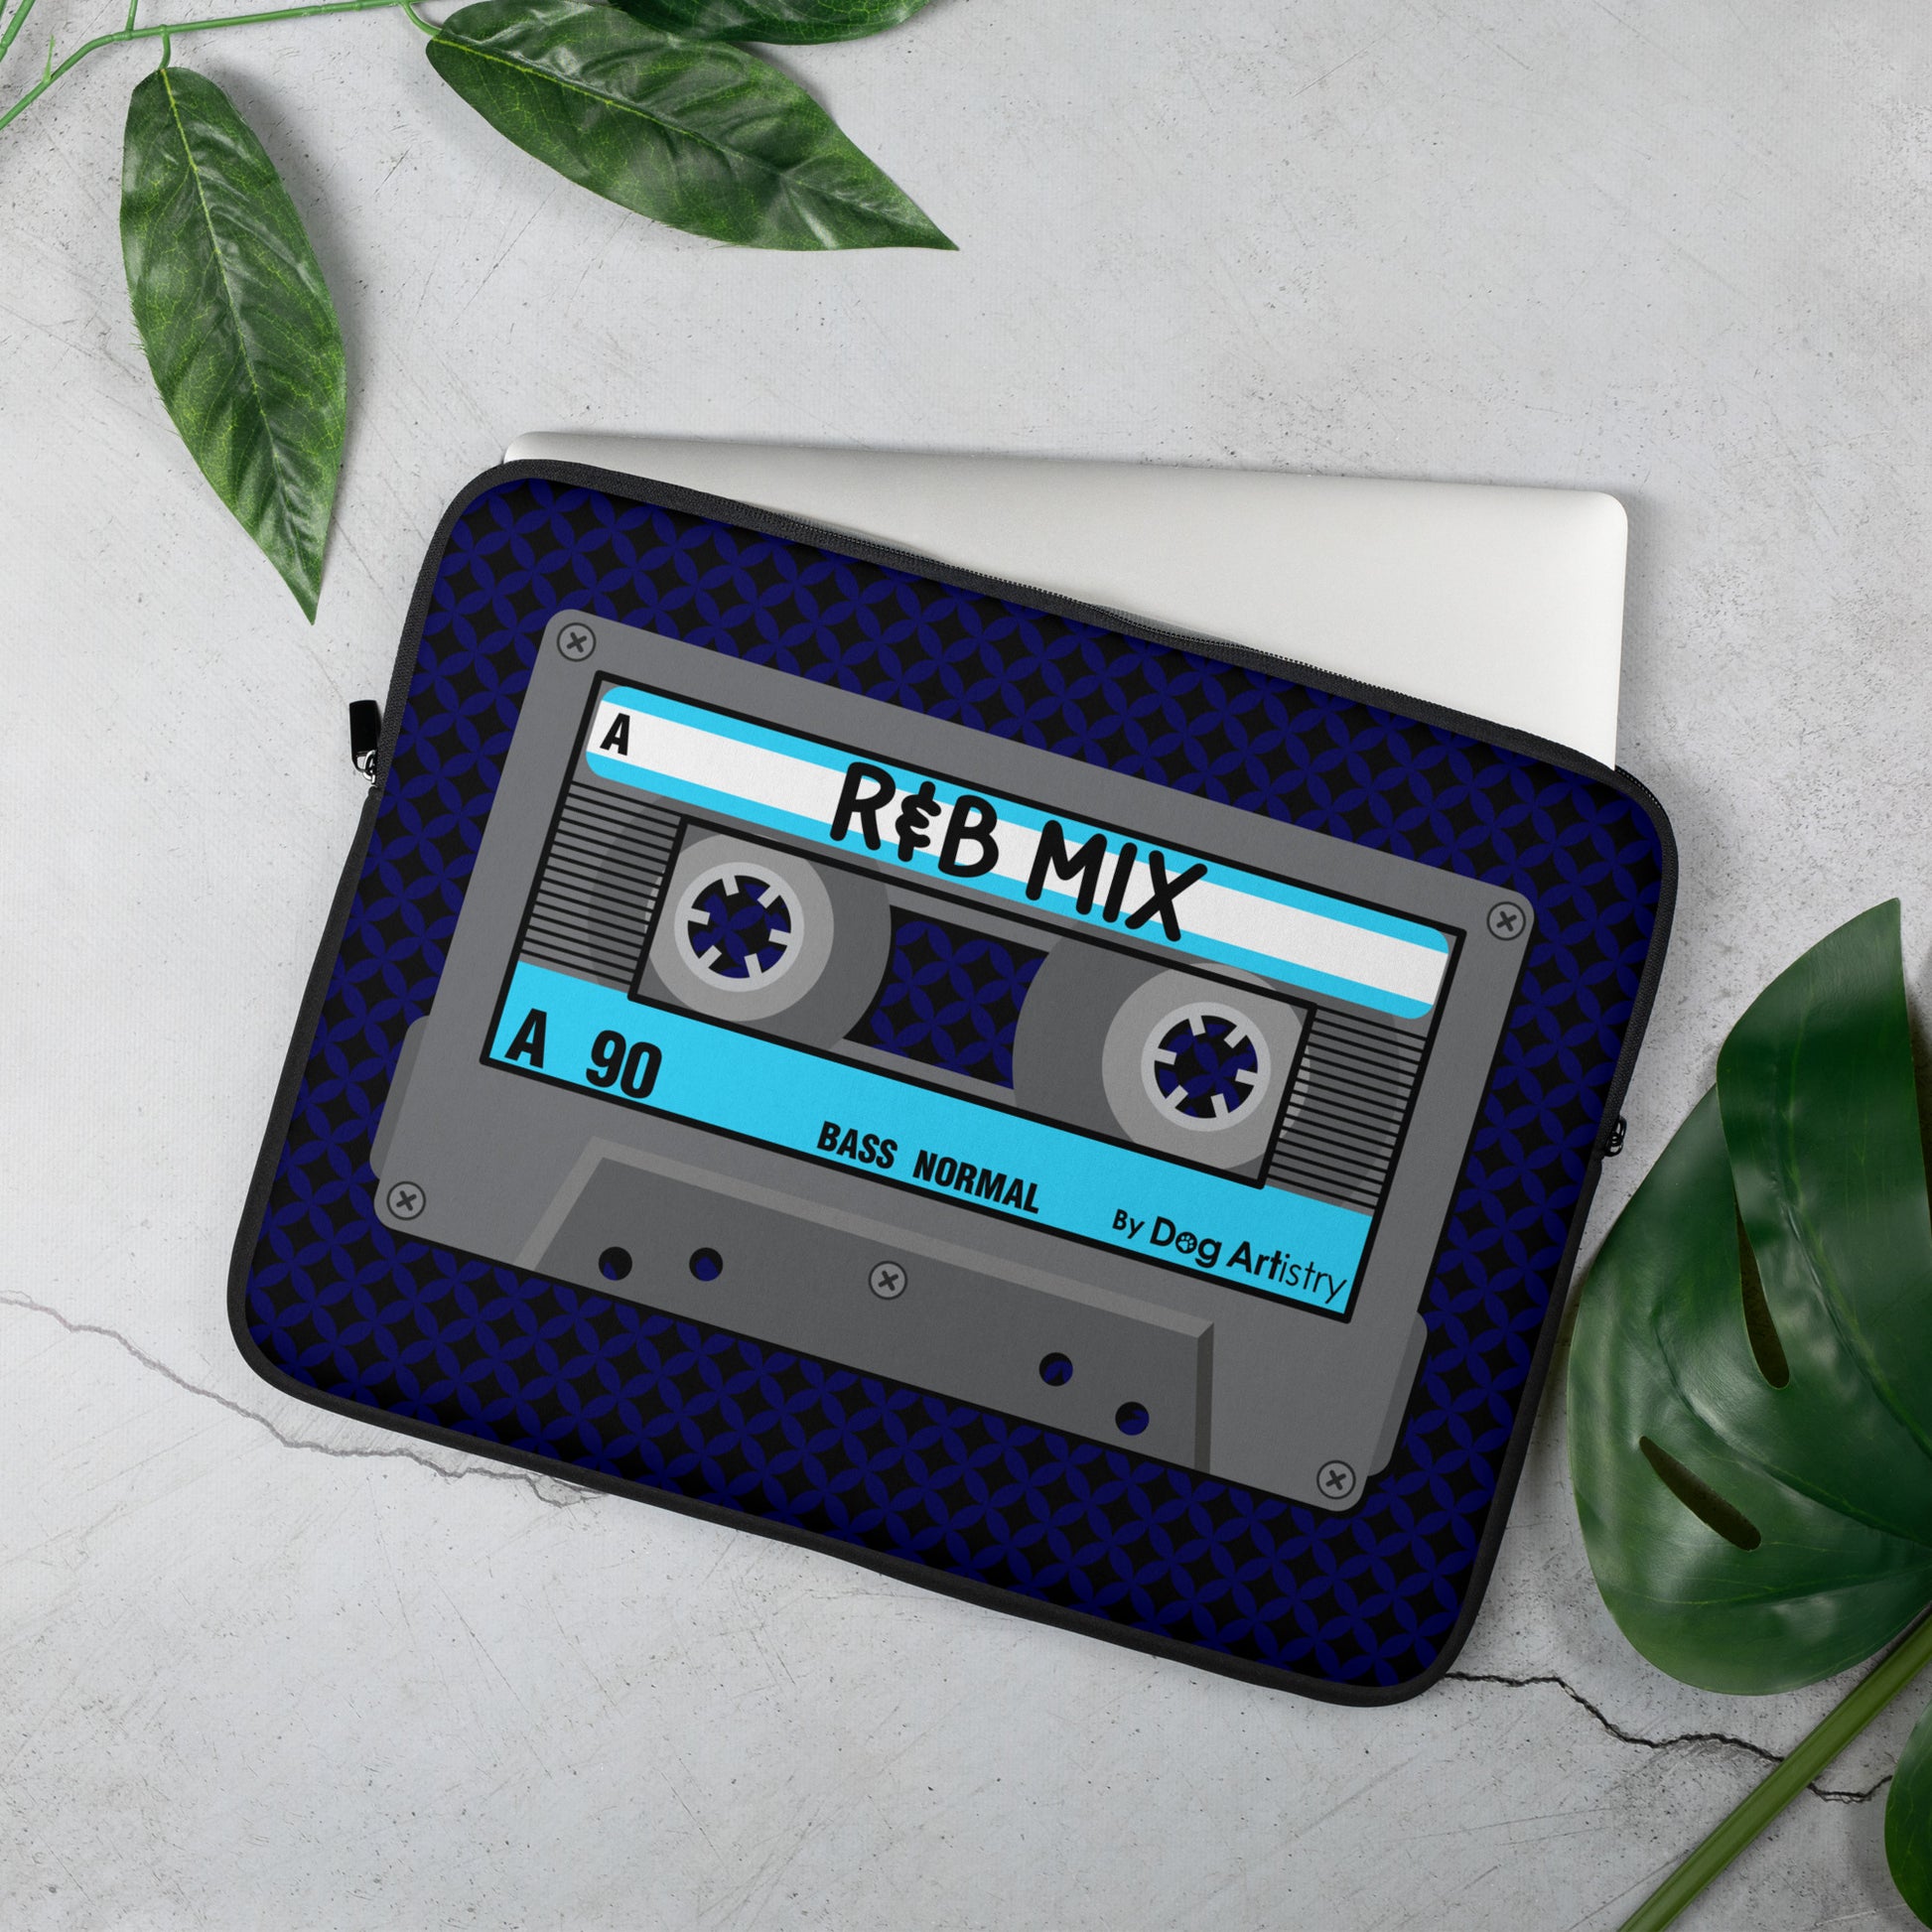 Cassette Tape R&B Mix music laptop sleeve designed by Dog Artistry.